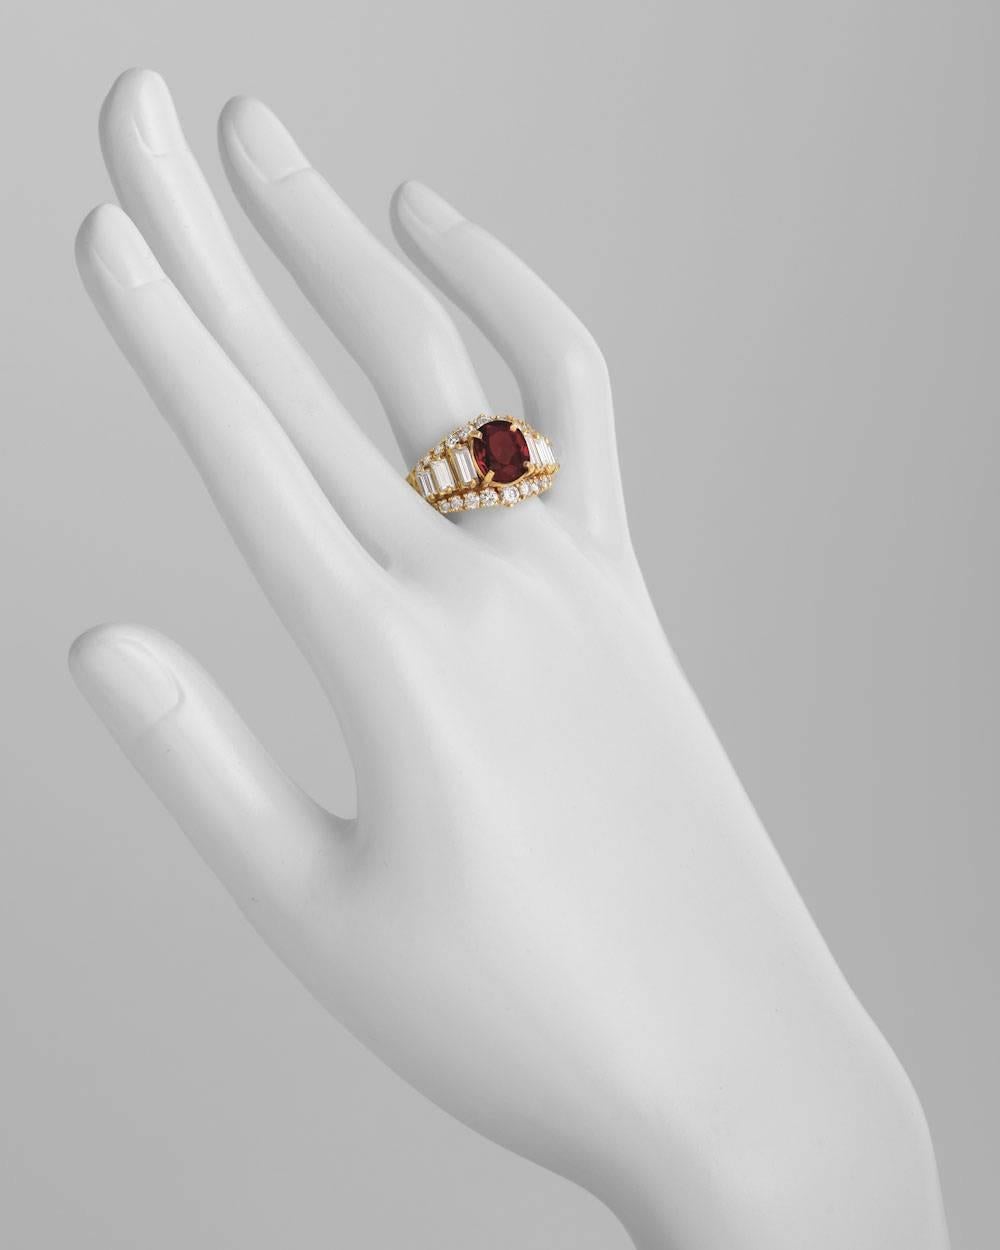 Ruby and diamond dress ring, centering an oval-shaped ruby weighing approximately 3.03 carats, flanked by graduated baguette-cut diamonds to the graduated circular-cut diamond surround, the diamonds altogether weighing approximately 1.81 total